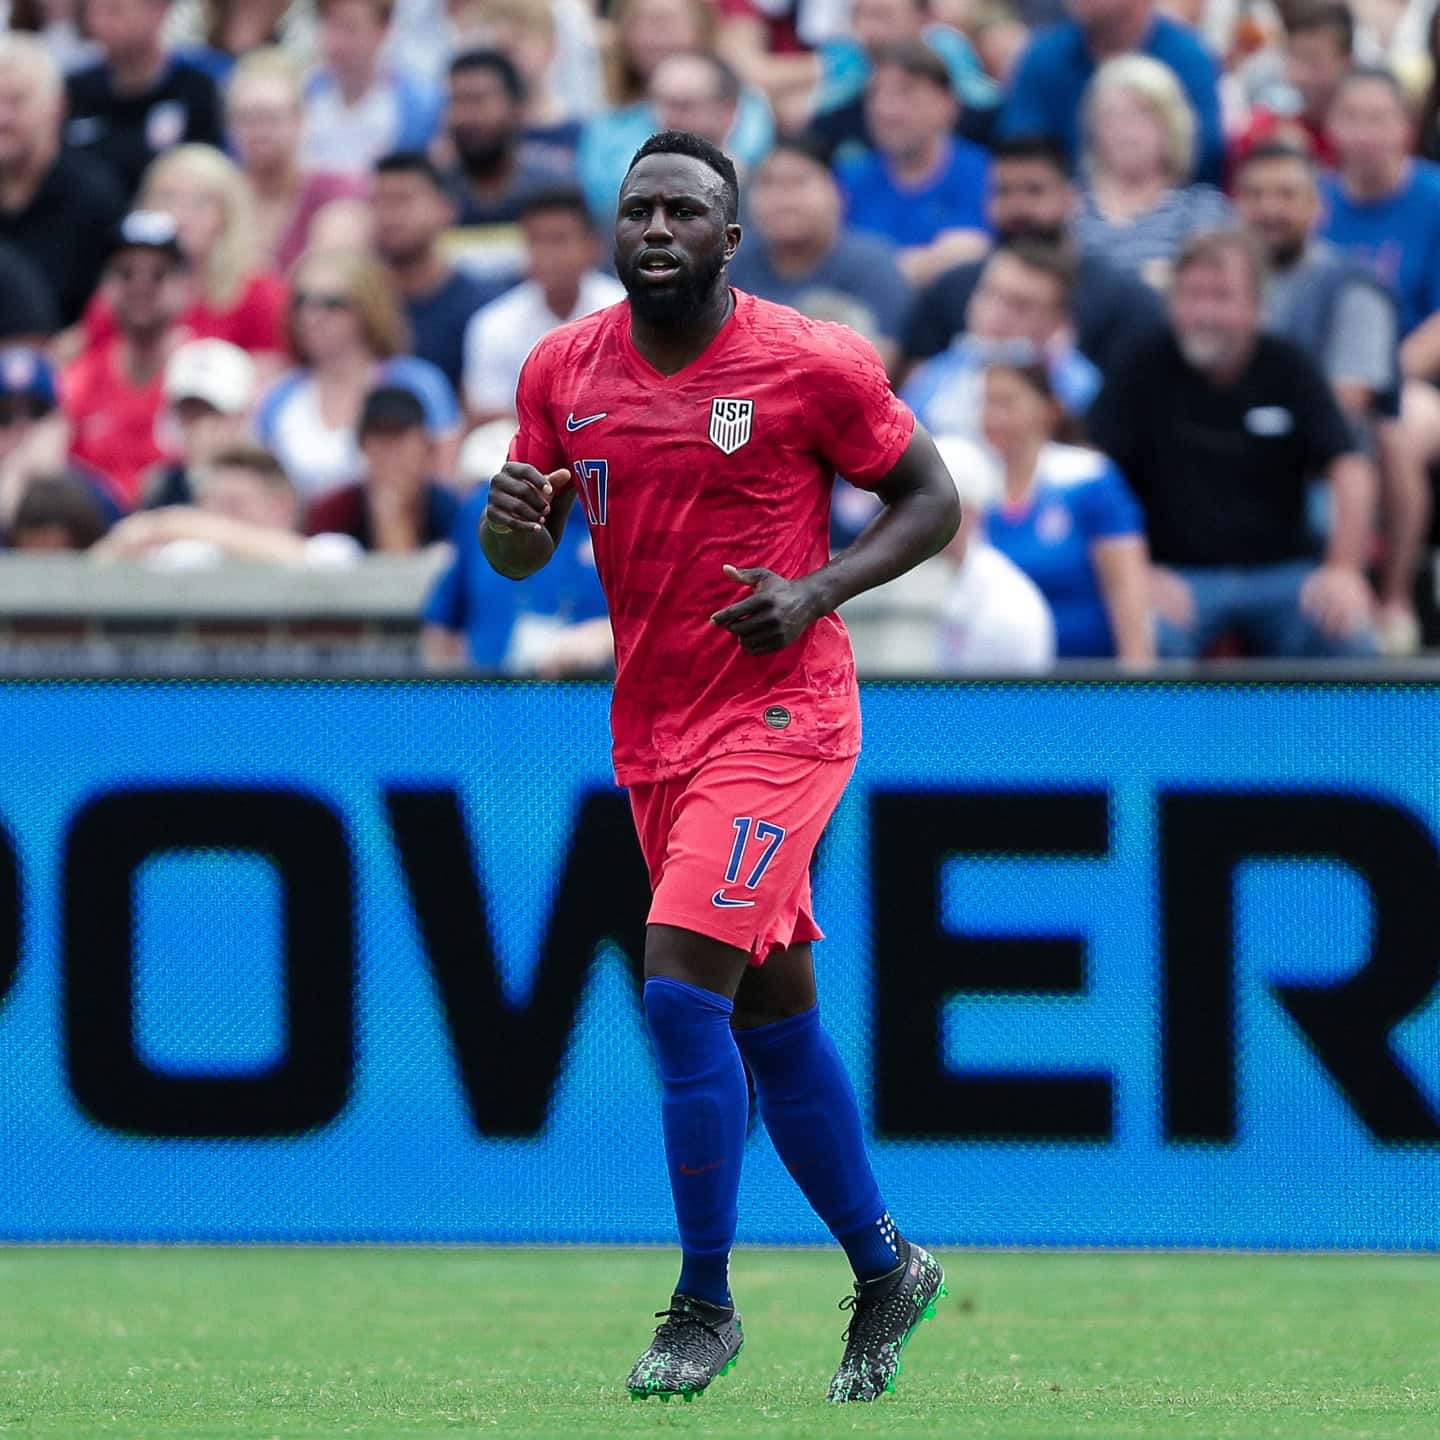 Jozy Altidore Forced to Withdraw from U.S. Men’s National Team’s October Nations League Roster Due to Injury